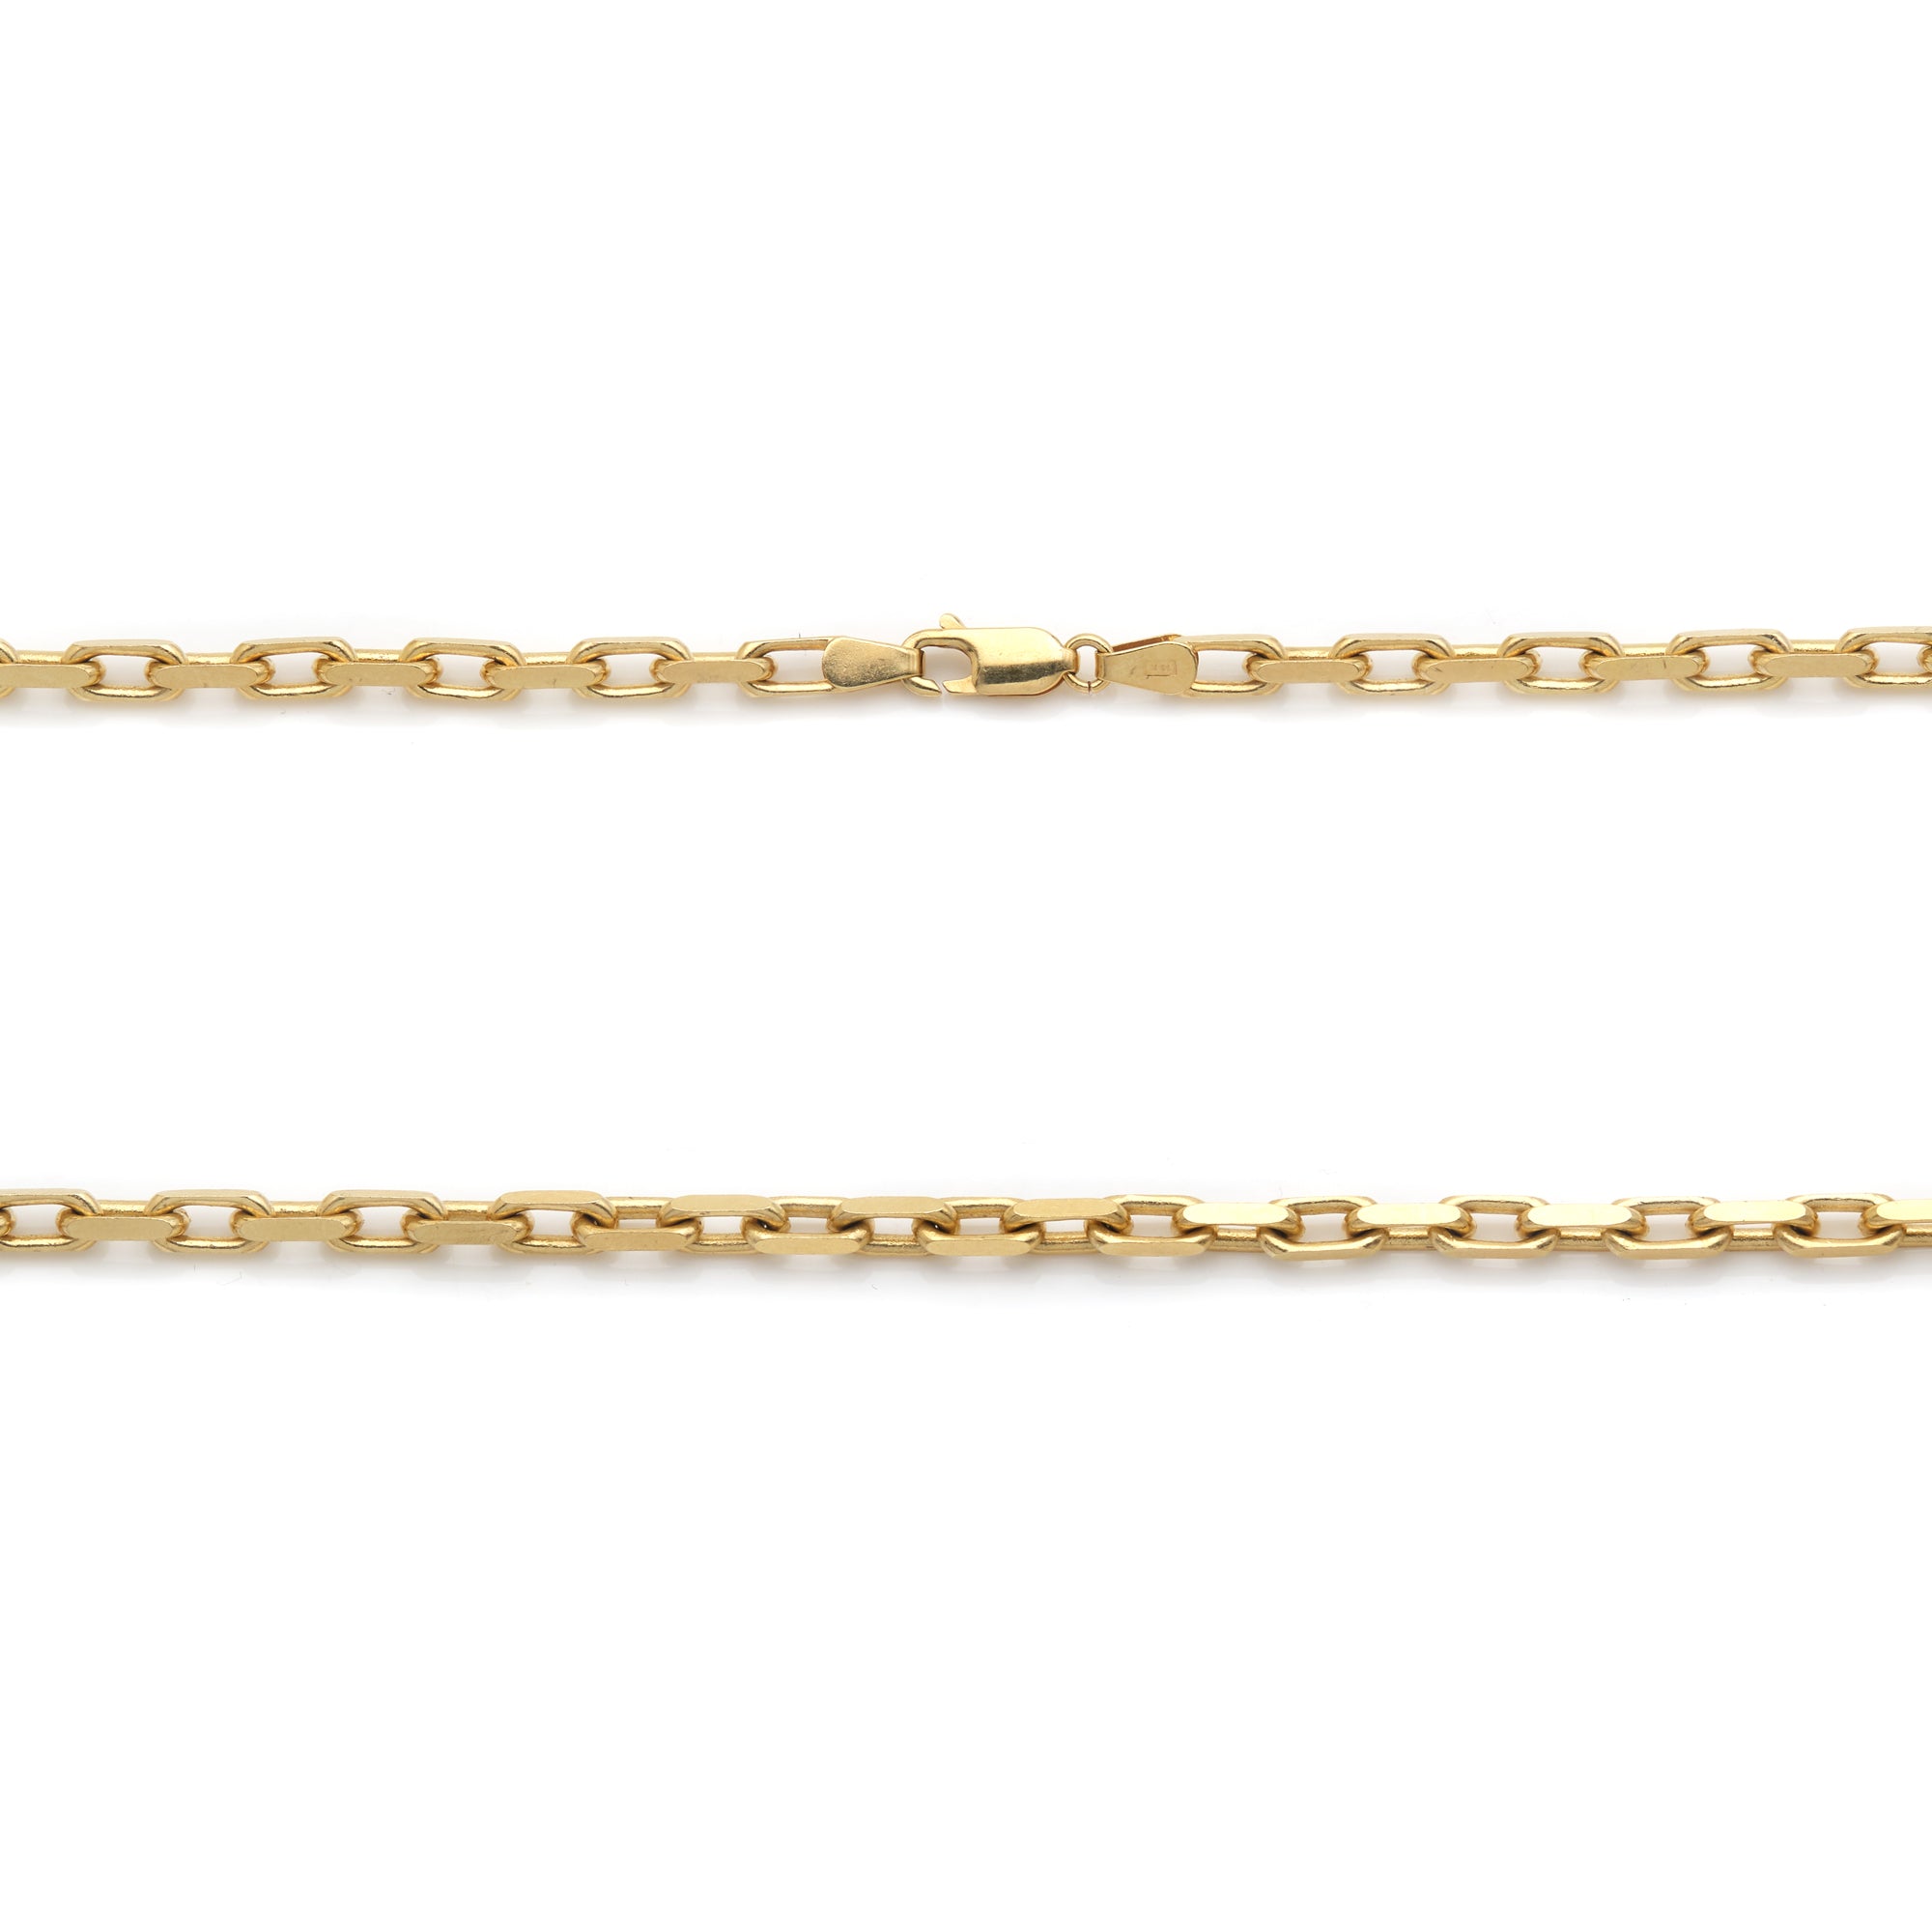 Cable Link Yellow Gold Chain